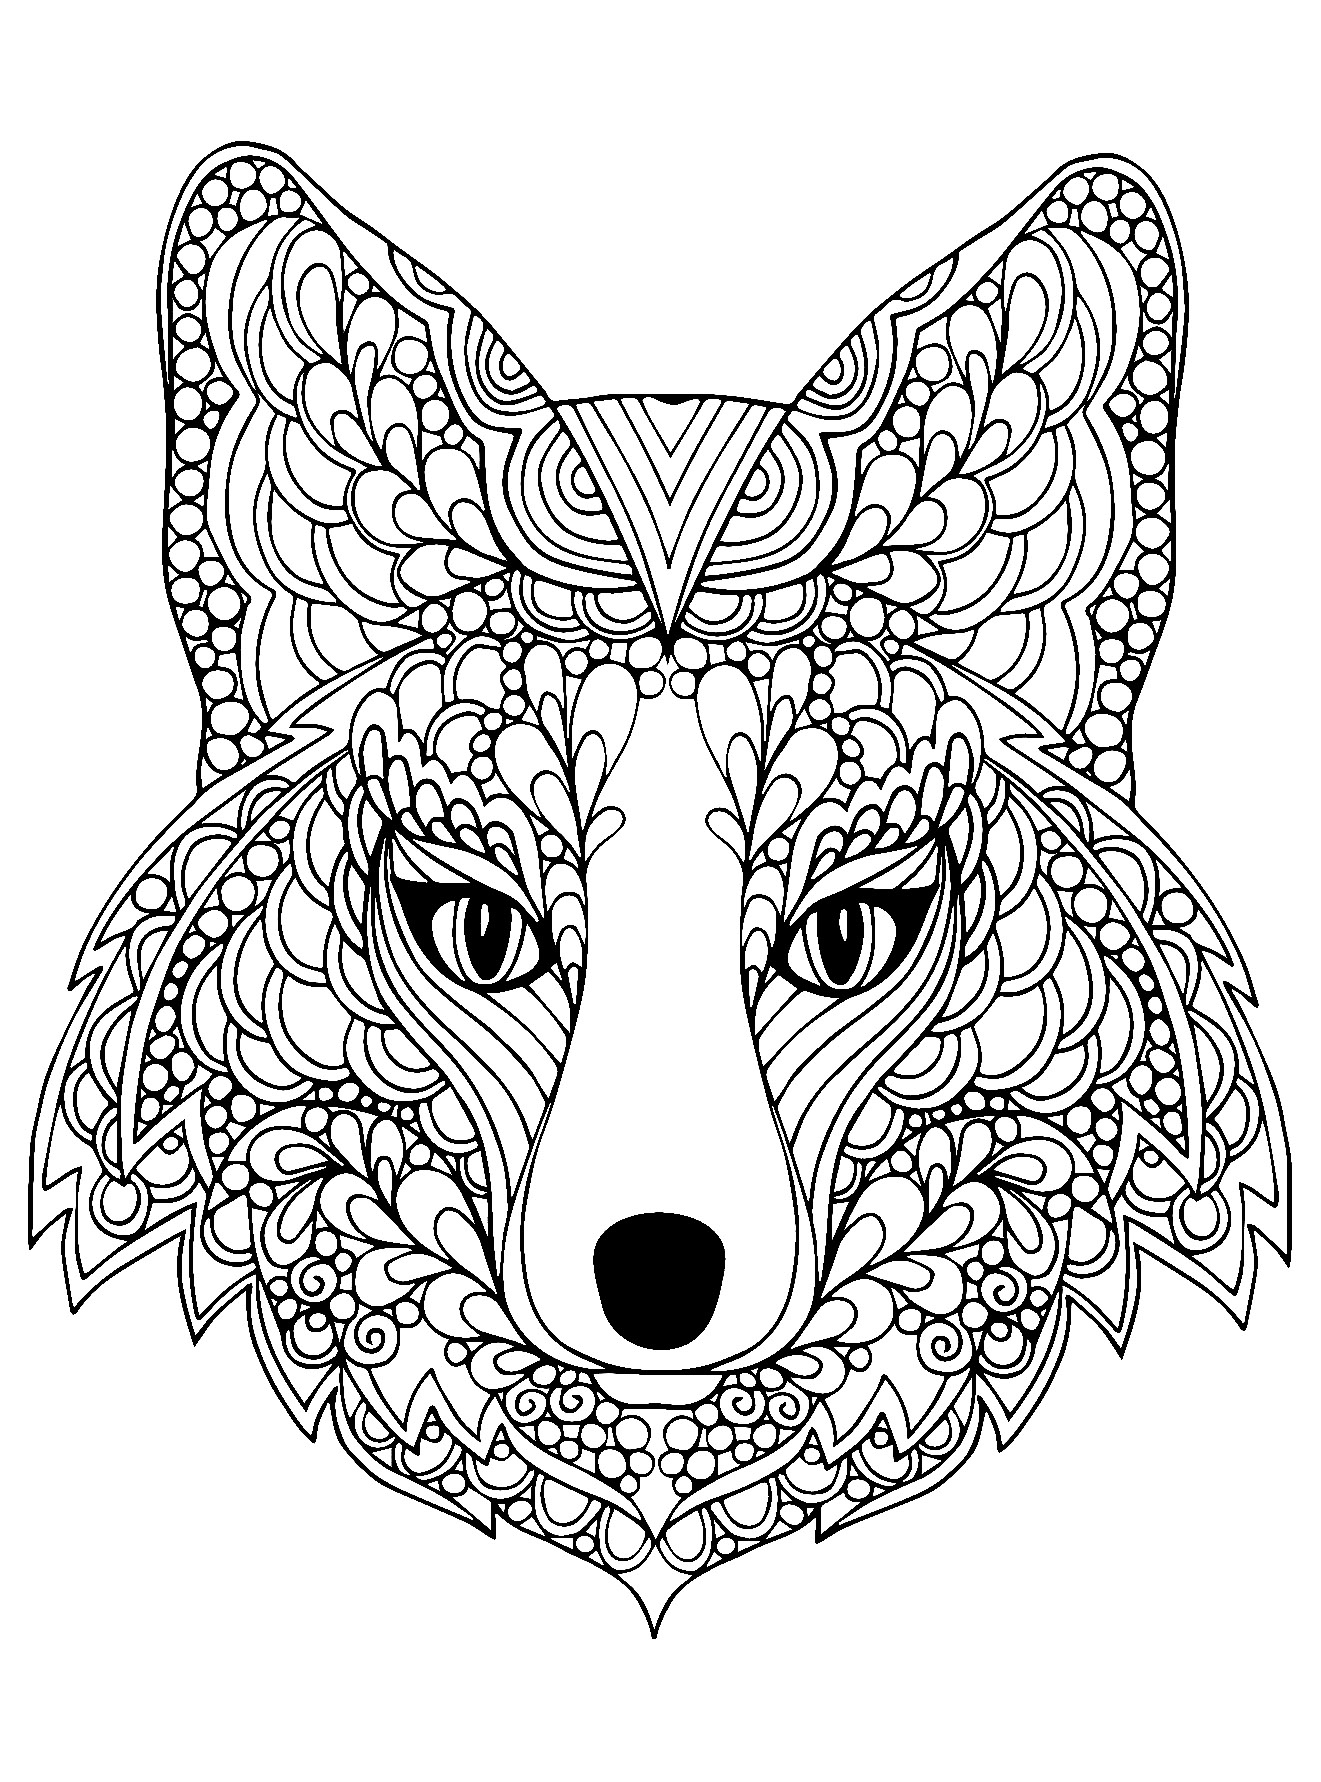 Anime Wolf Pup Coloring Pages - Free & Printable!